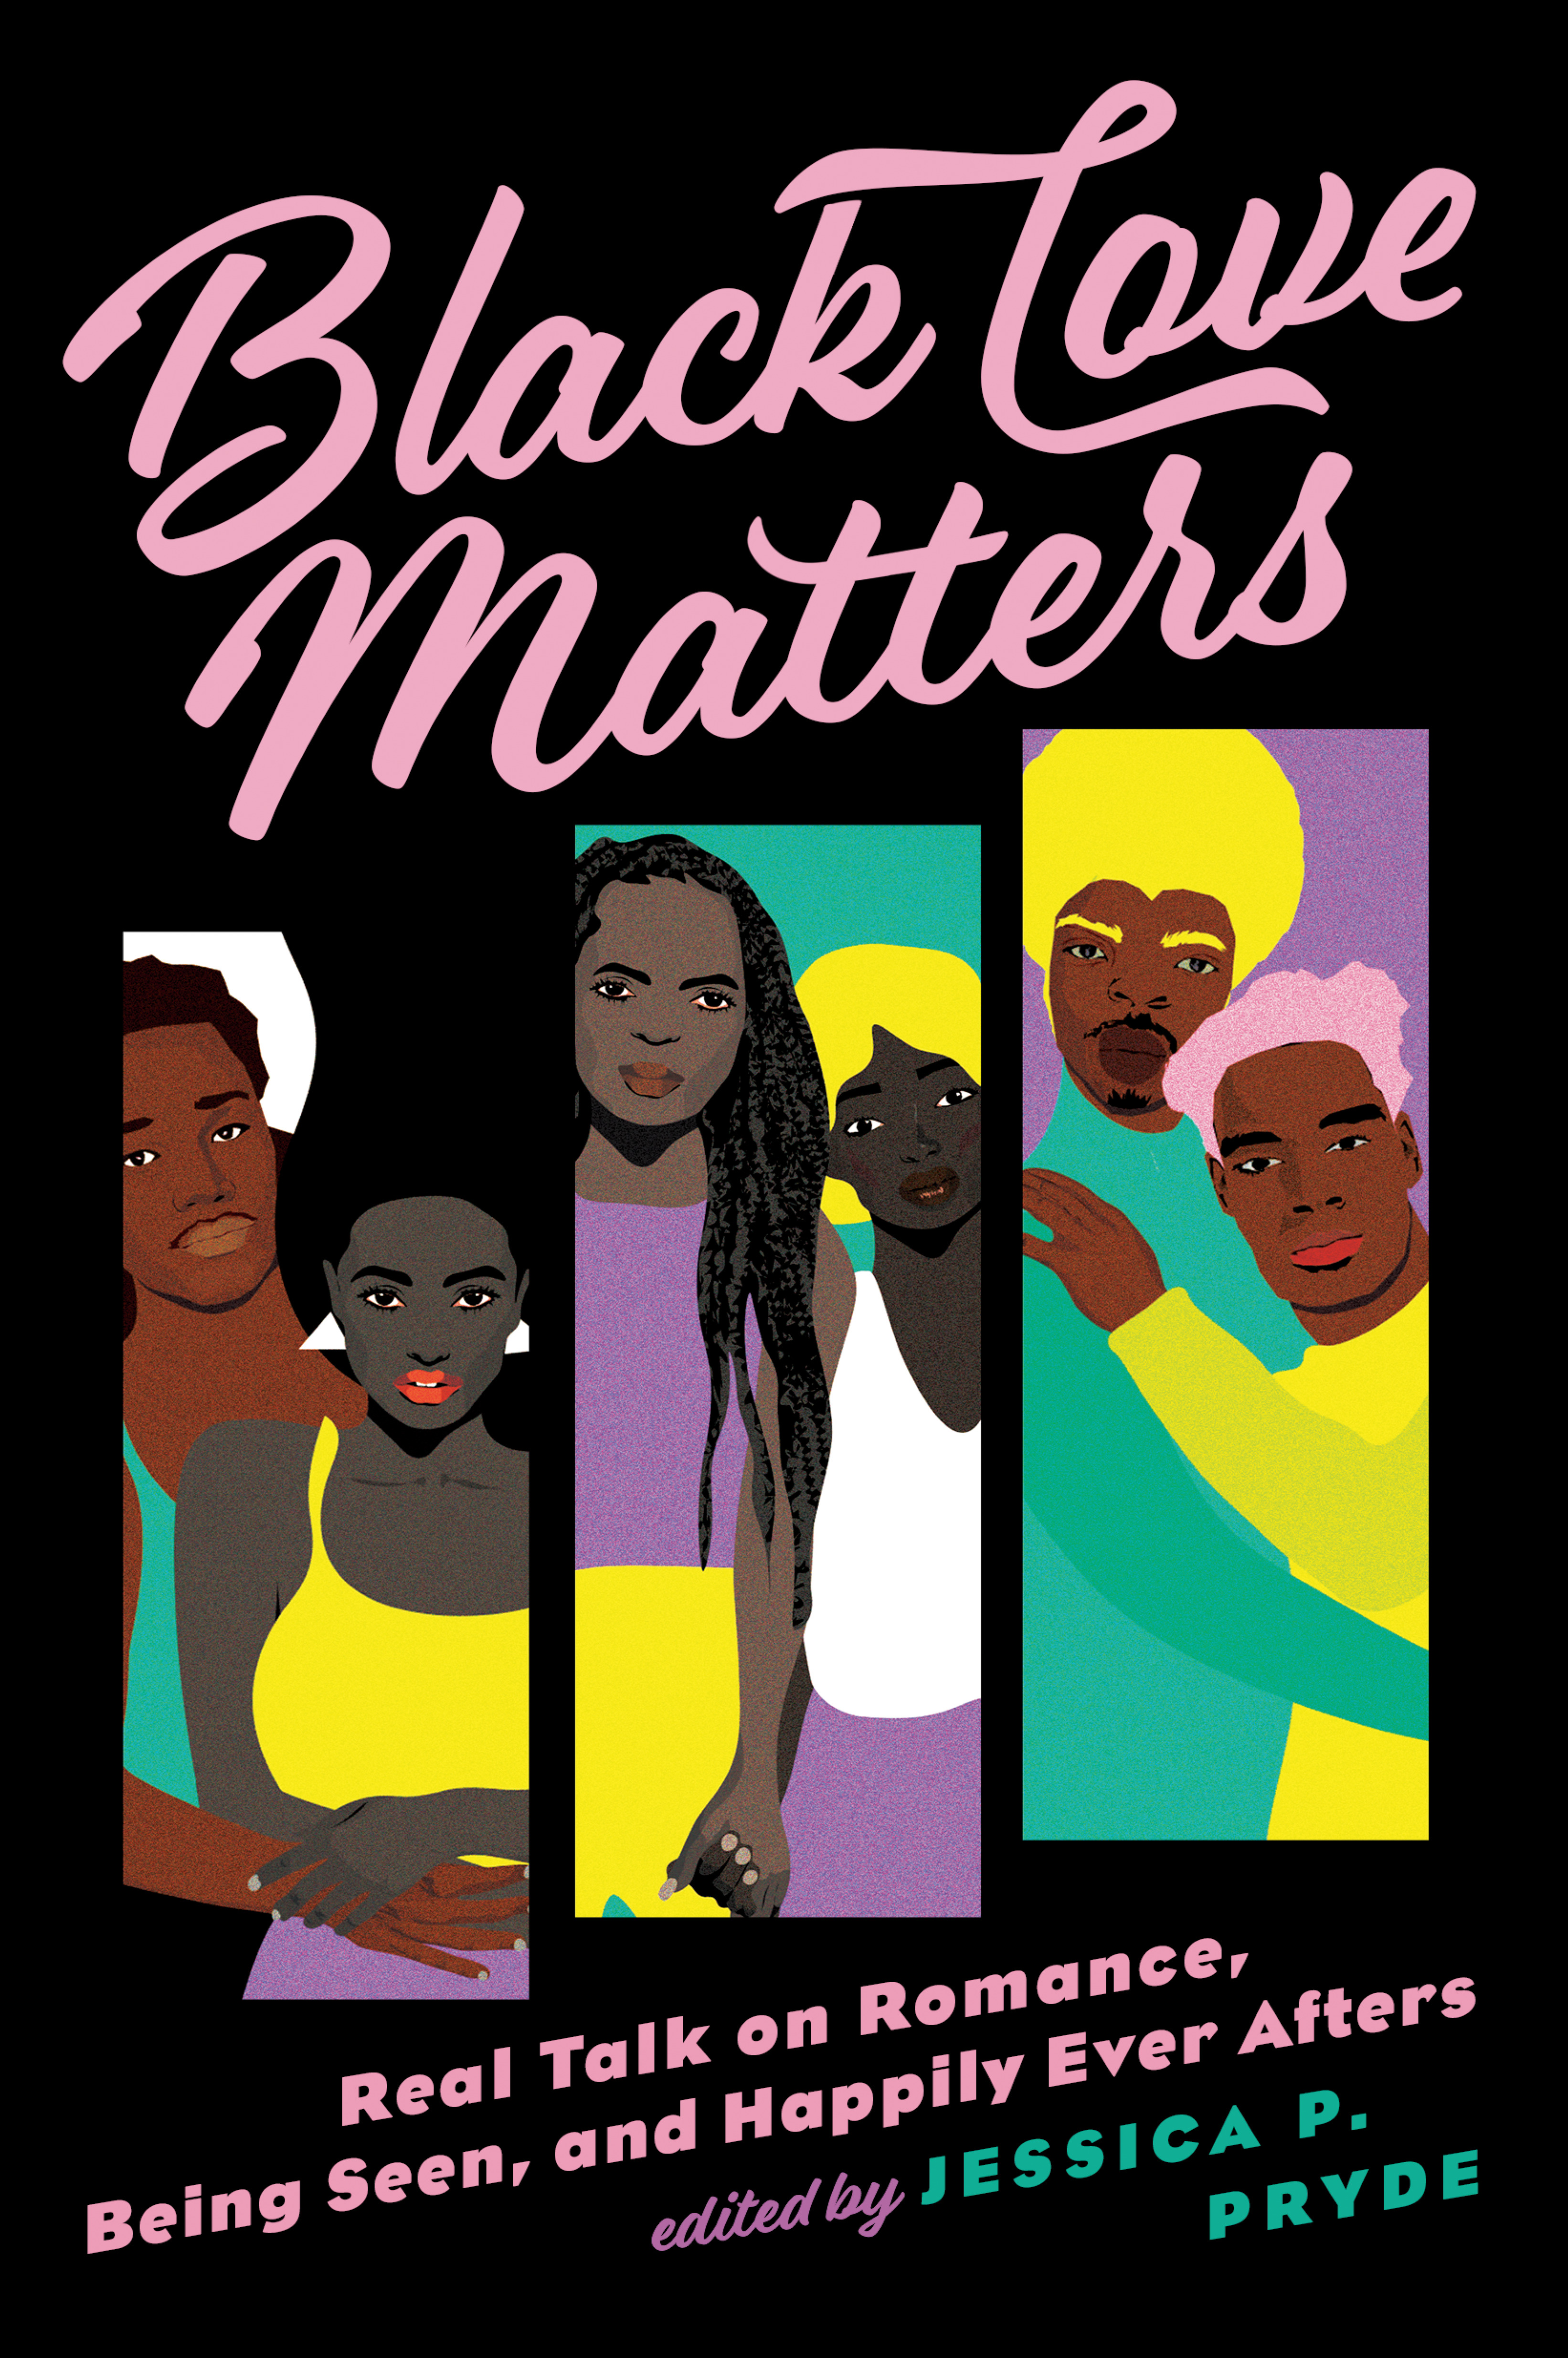 Black Love Matters : Real Talk on Romance, Being Seen, and Happily Ever Afters | Pryde, Jessica P.